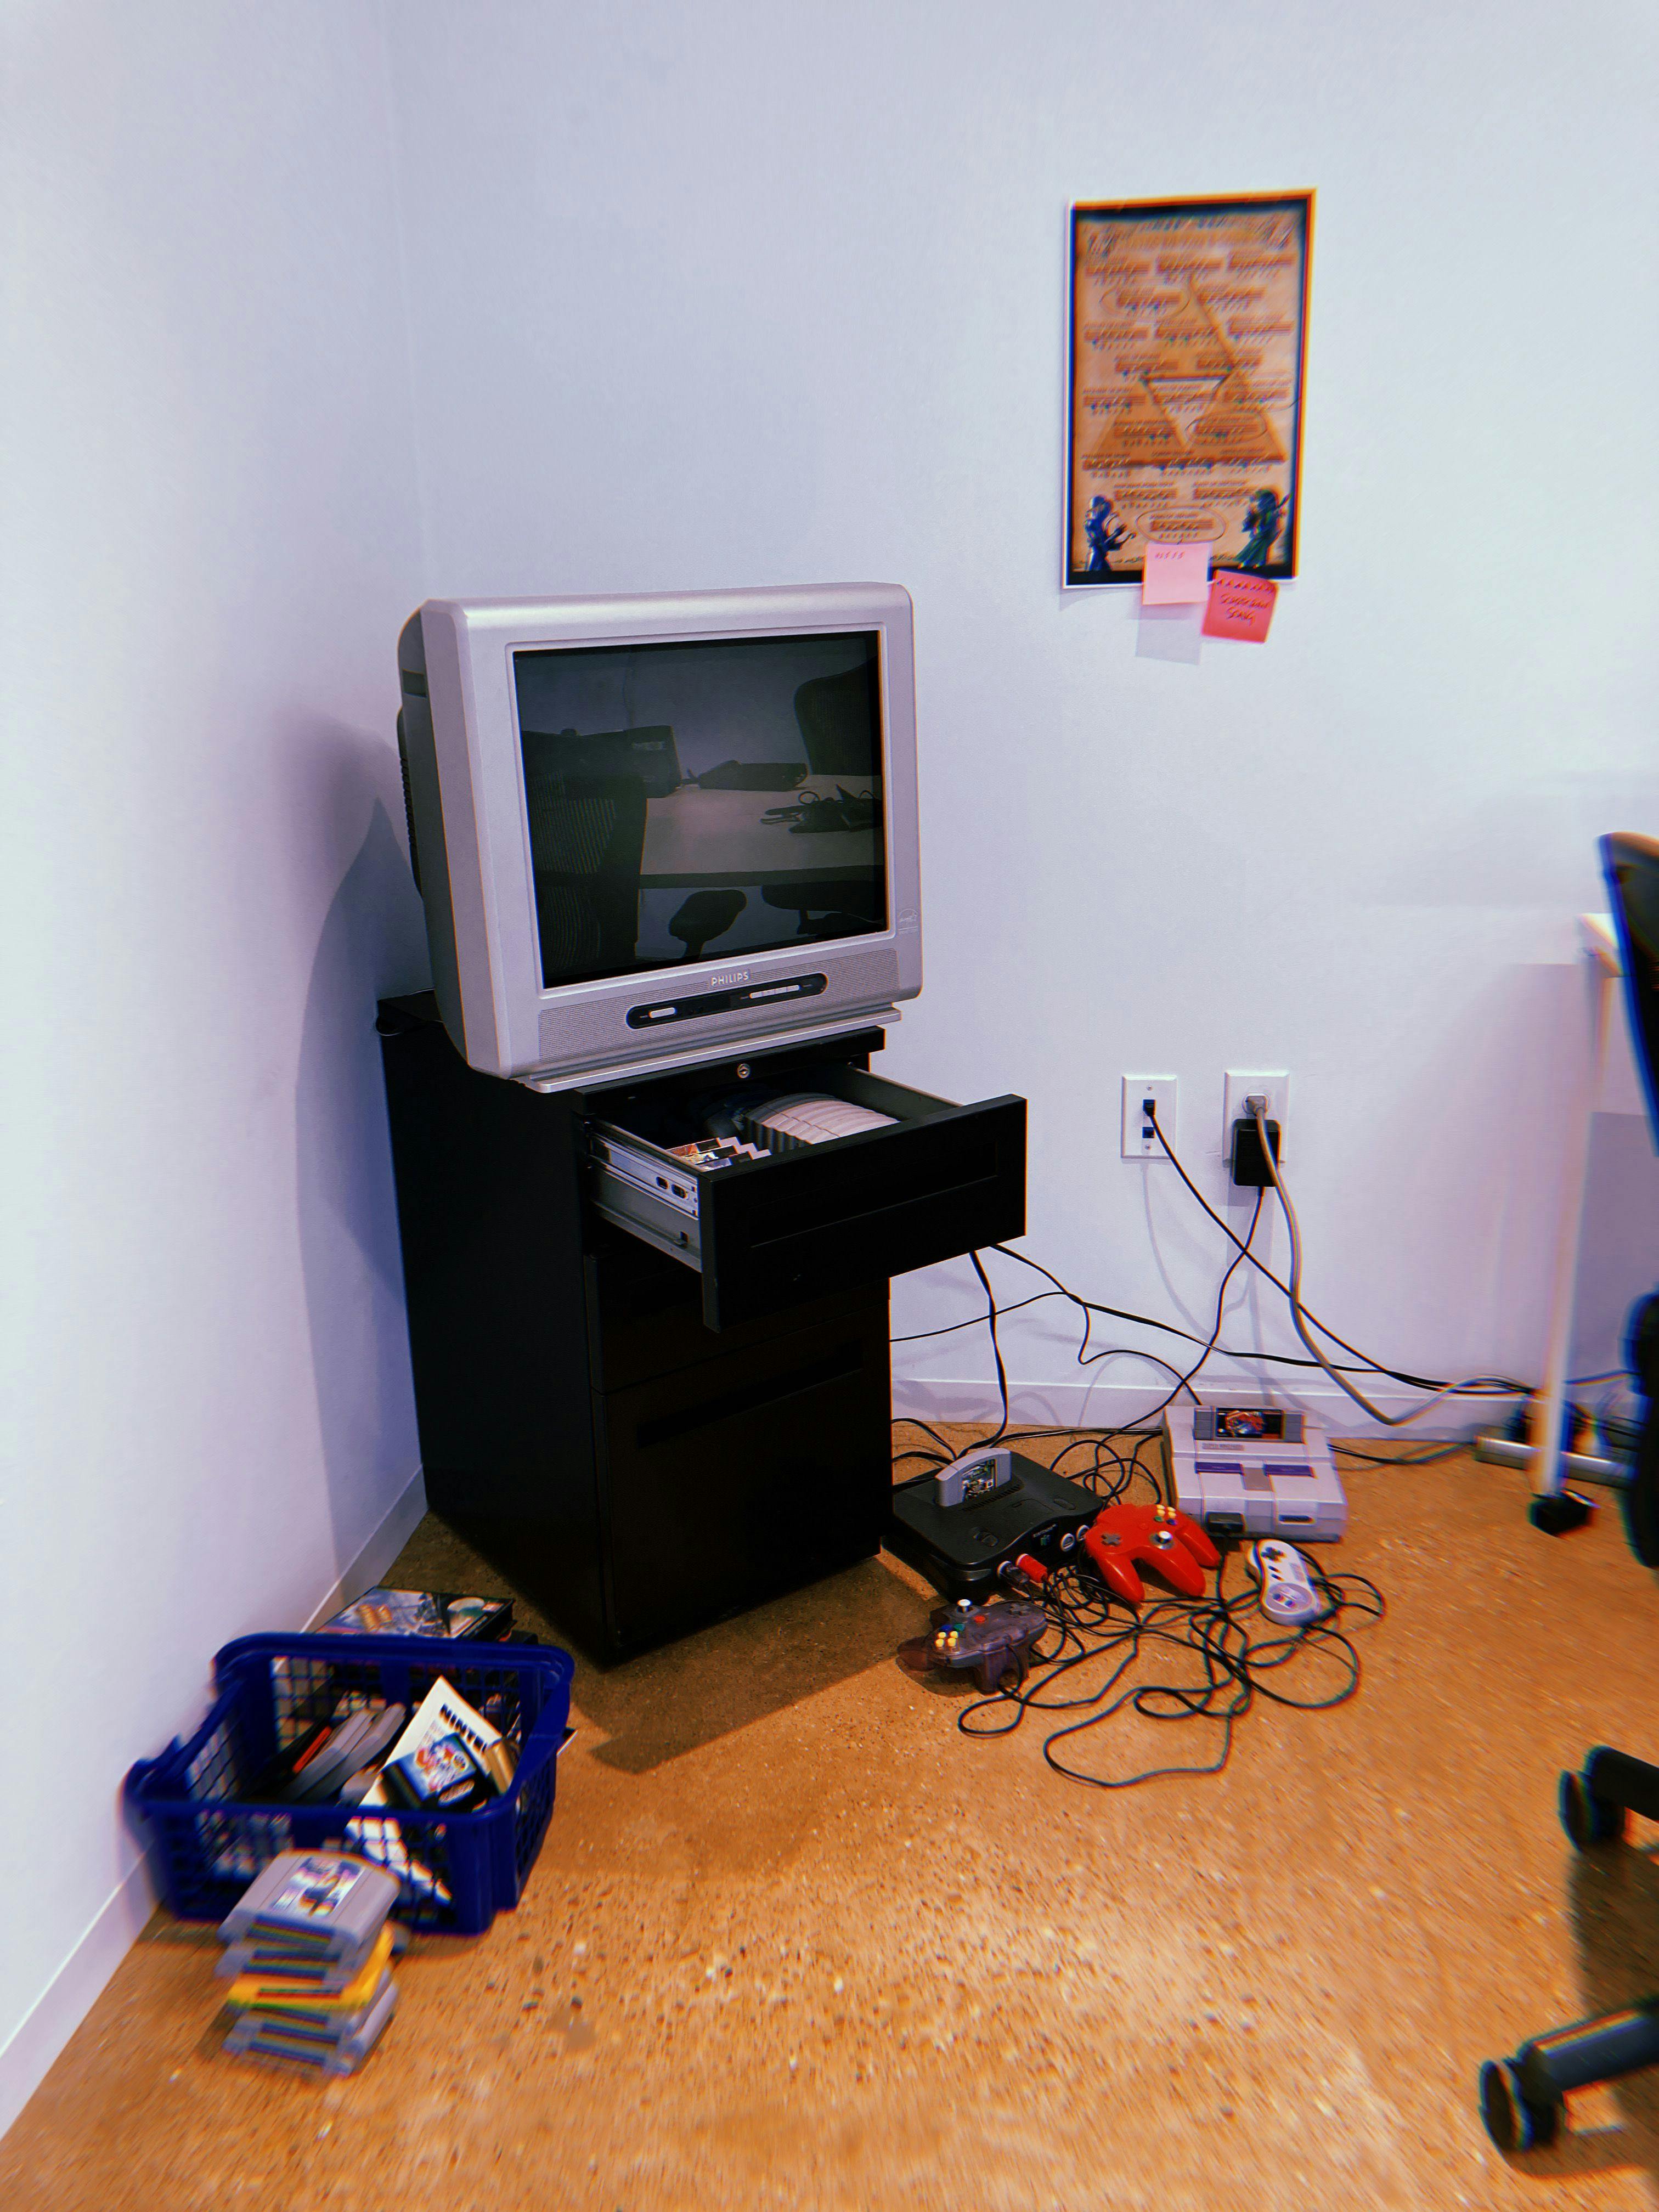 Nintendo 64 in the corner of the empty office. Bet you can't beat our Starfox runs.